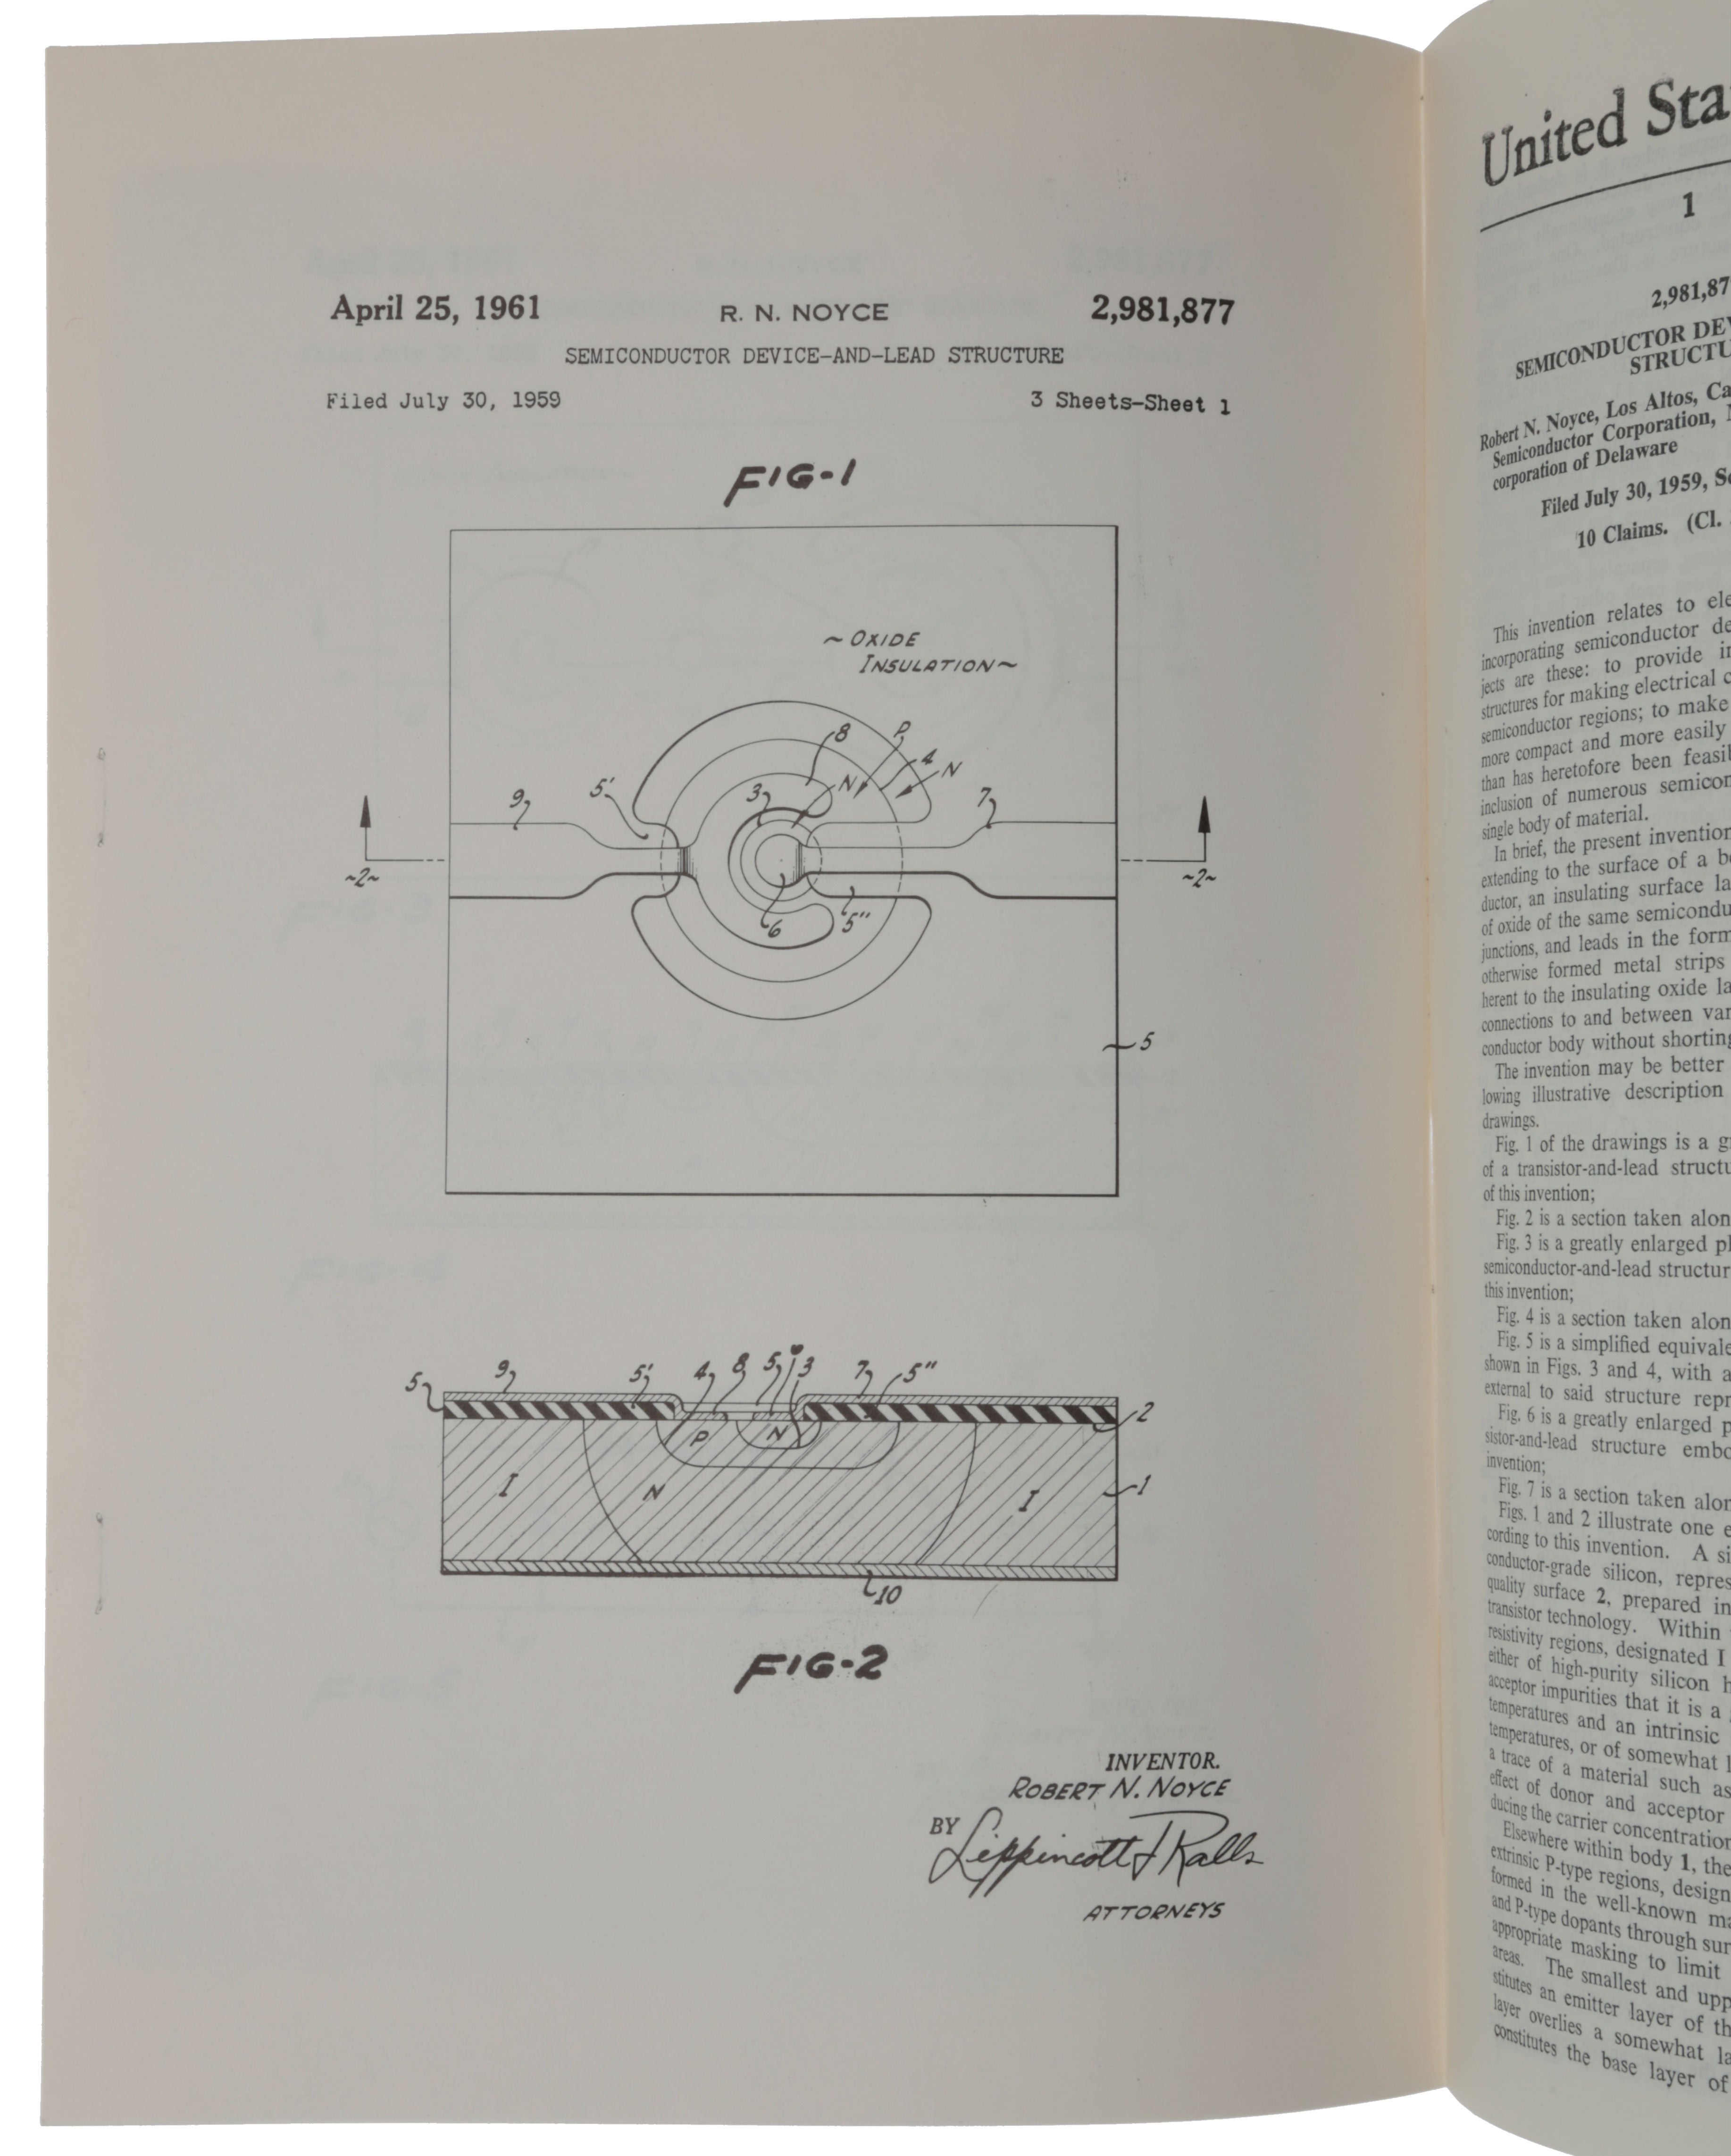 Item #6003 Semiconductor Device-and-Lead Structure. U.S. patent 2,981,877, filed on July 30, 1959, granted on April 25, 1961. Robert Norton NOYCE.